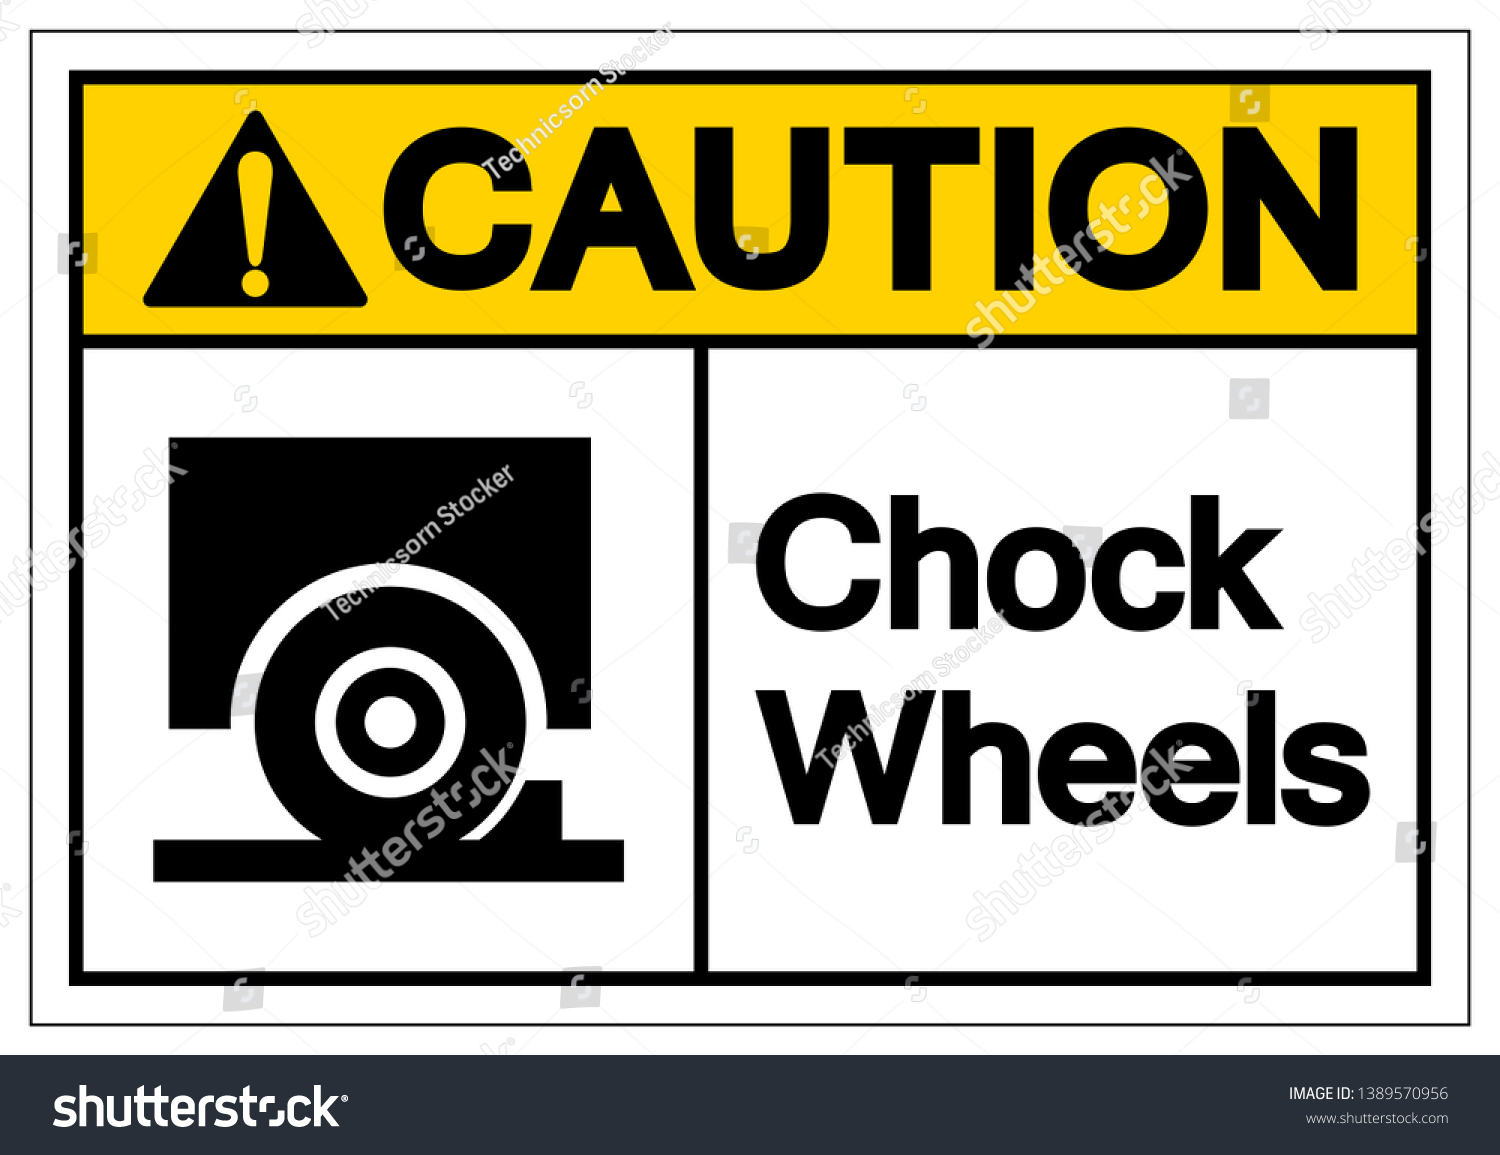 SVG of Caution Chock Wheels Symbol Sign, Vector Illustration, Isolate On White Background Label. EPS10  svg